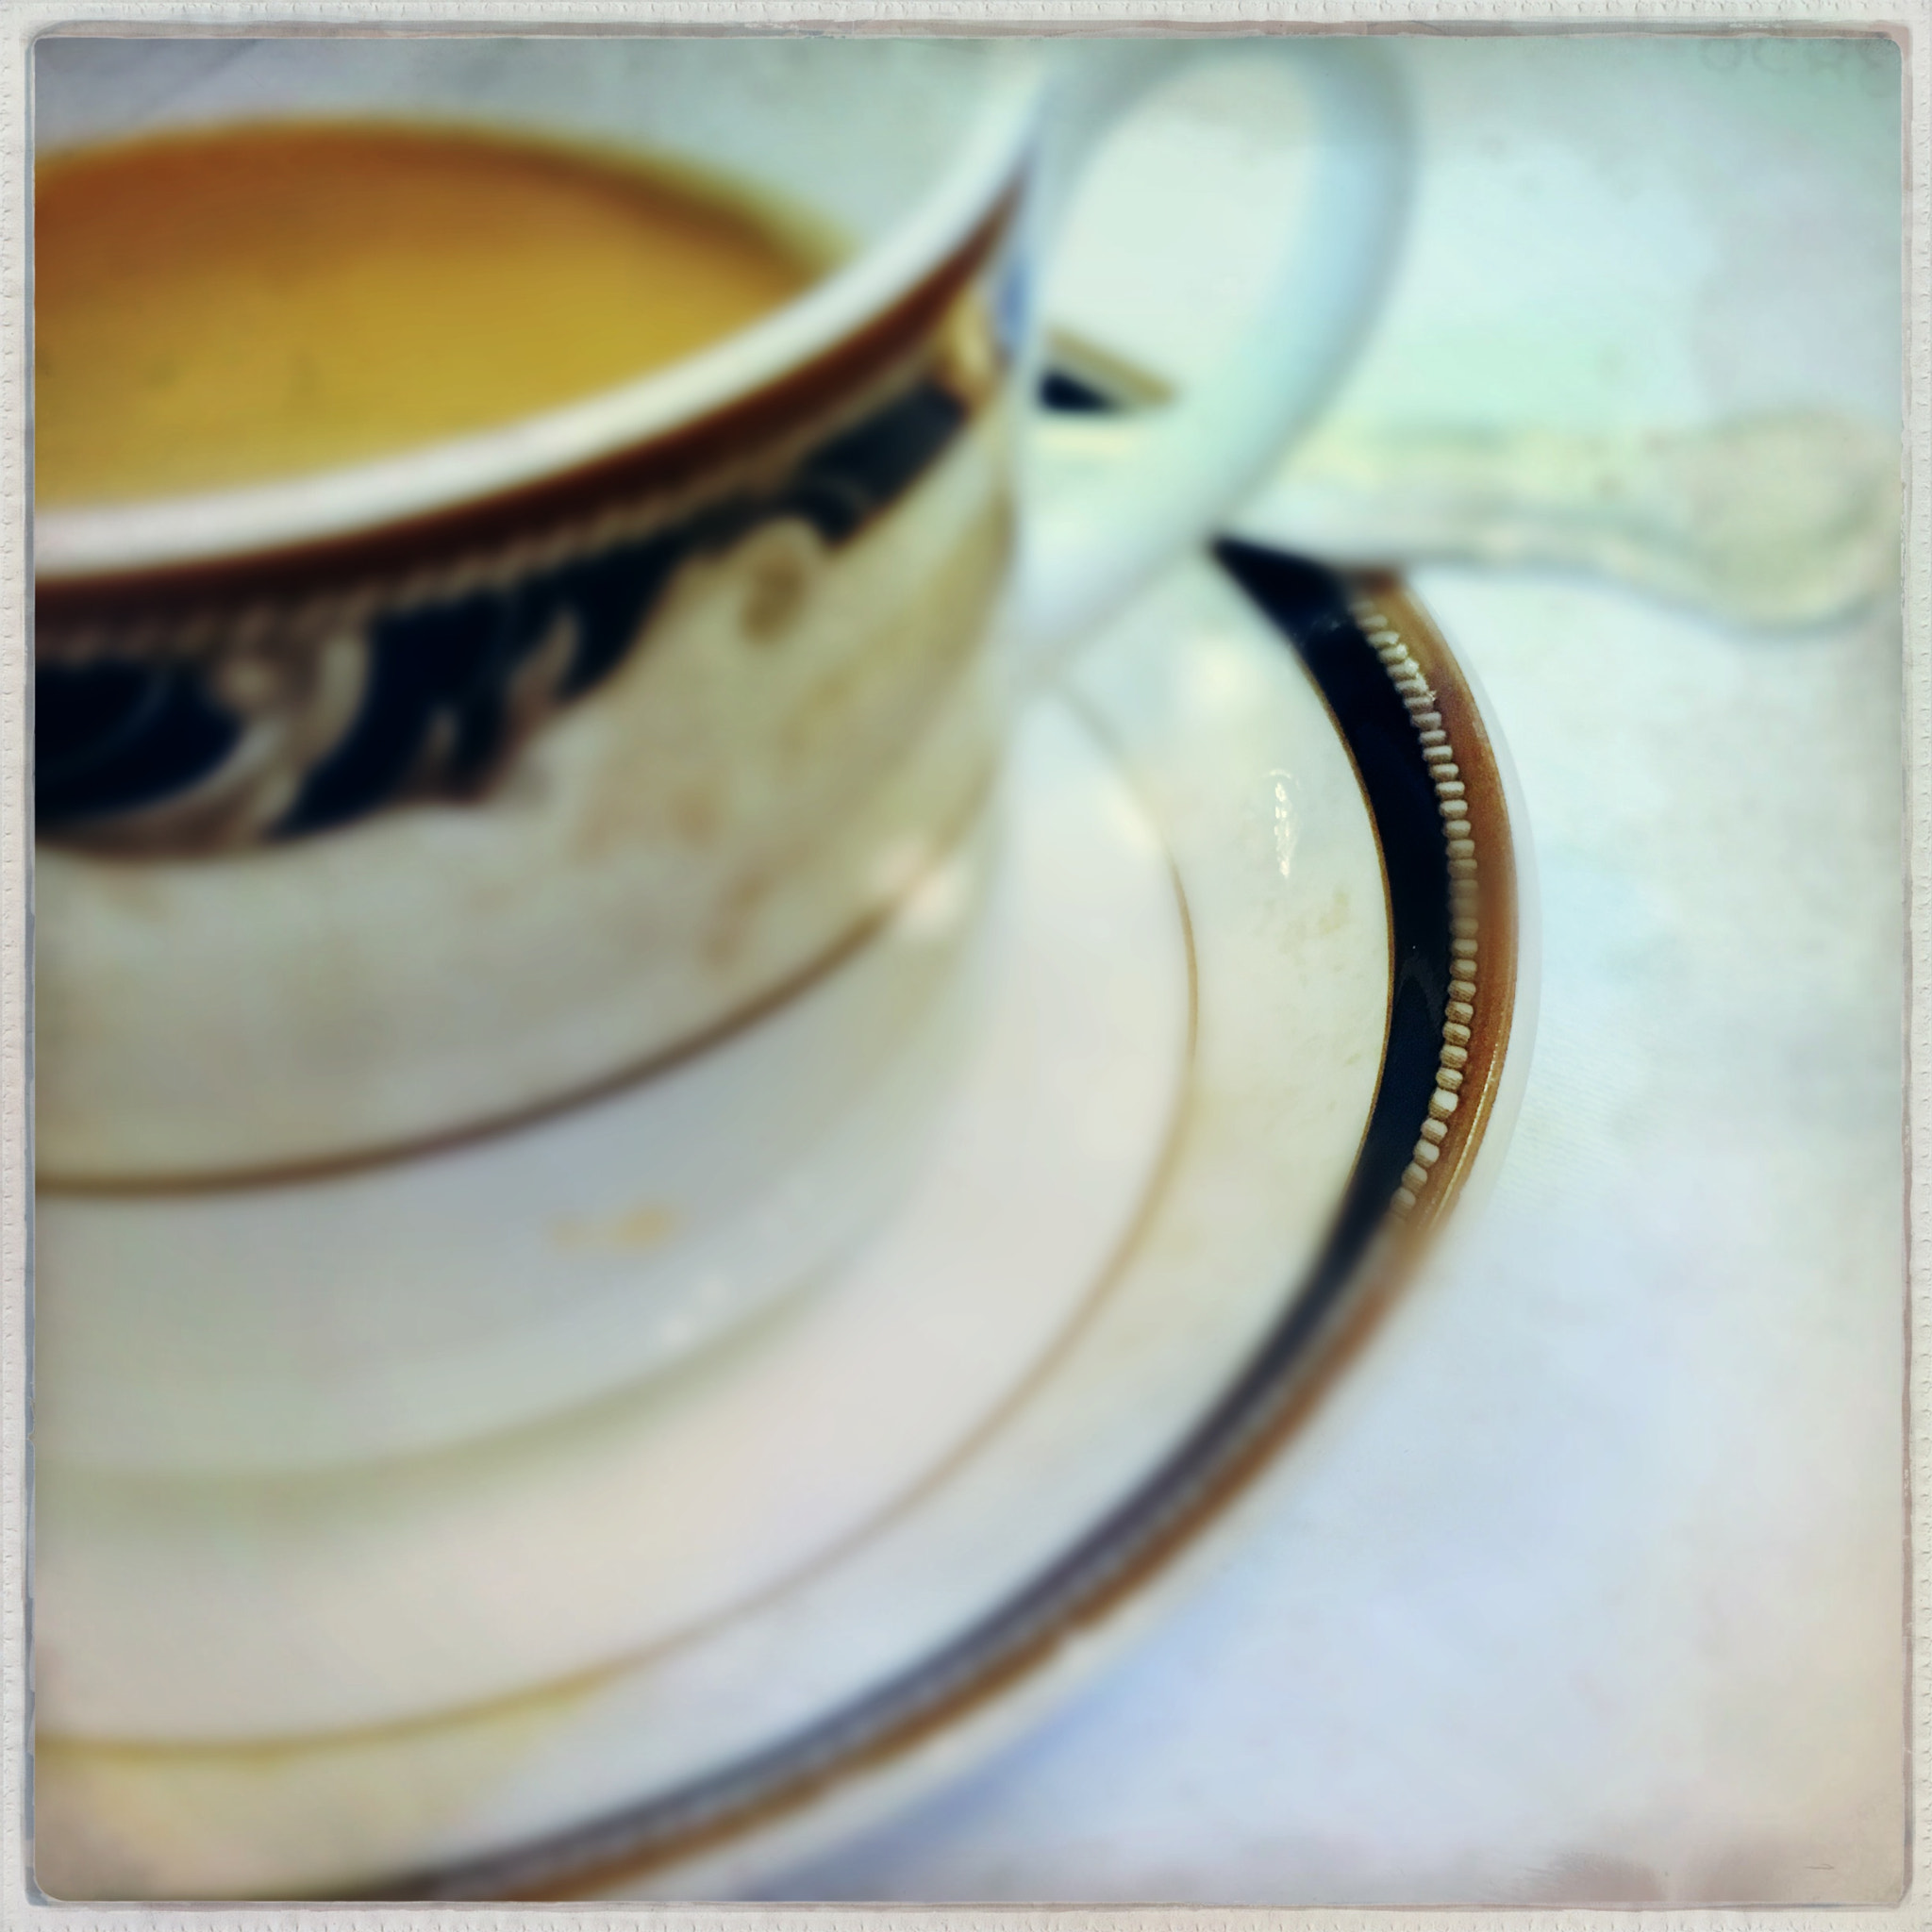 Hipstamatic 333 sample photo. Wedgewood cup & saucer - breakfast at ashford castle, cong, ireland photography